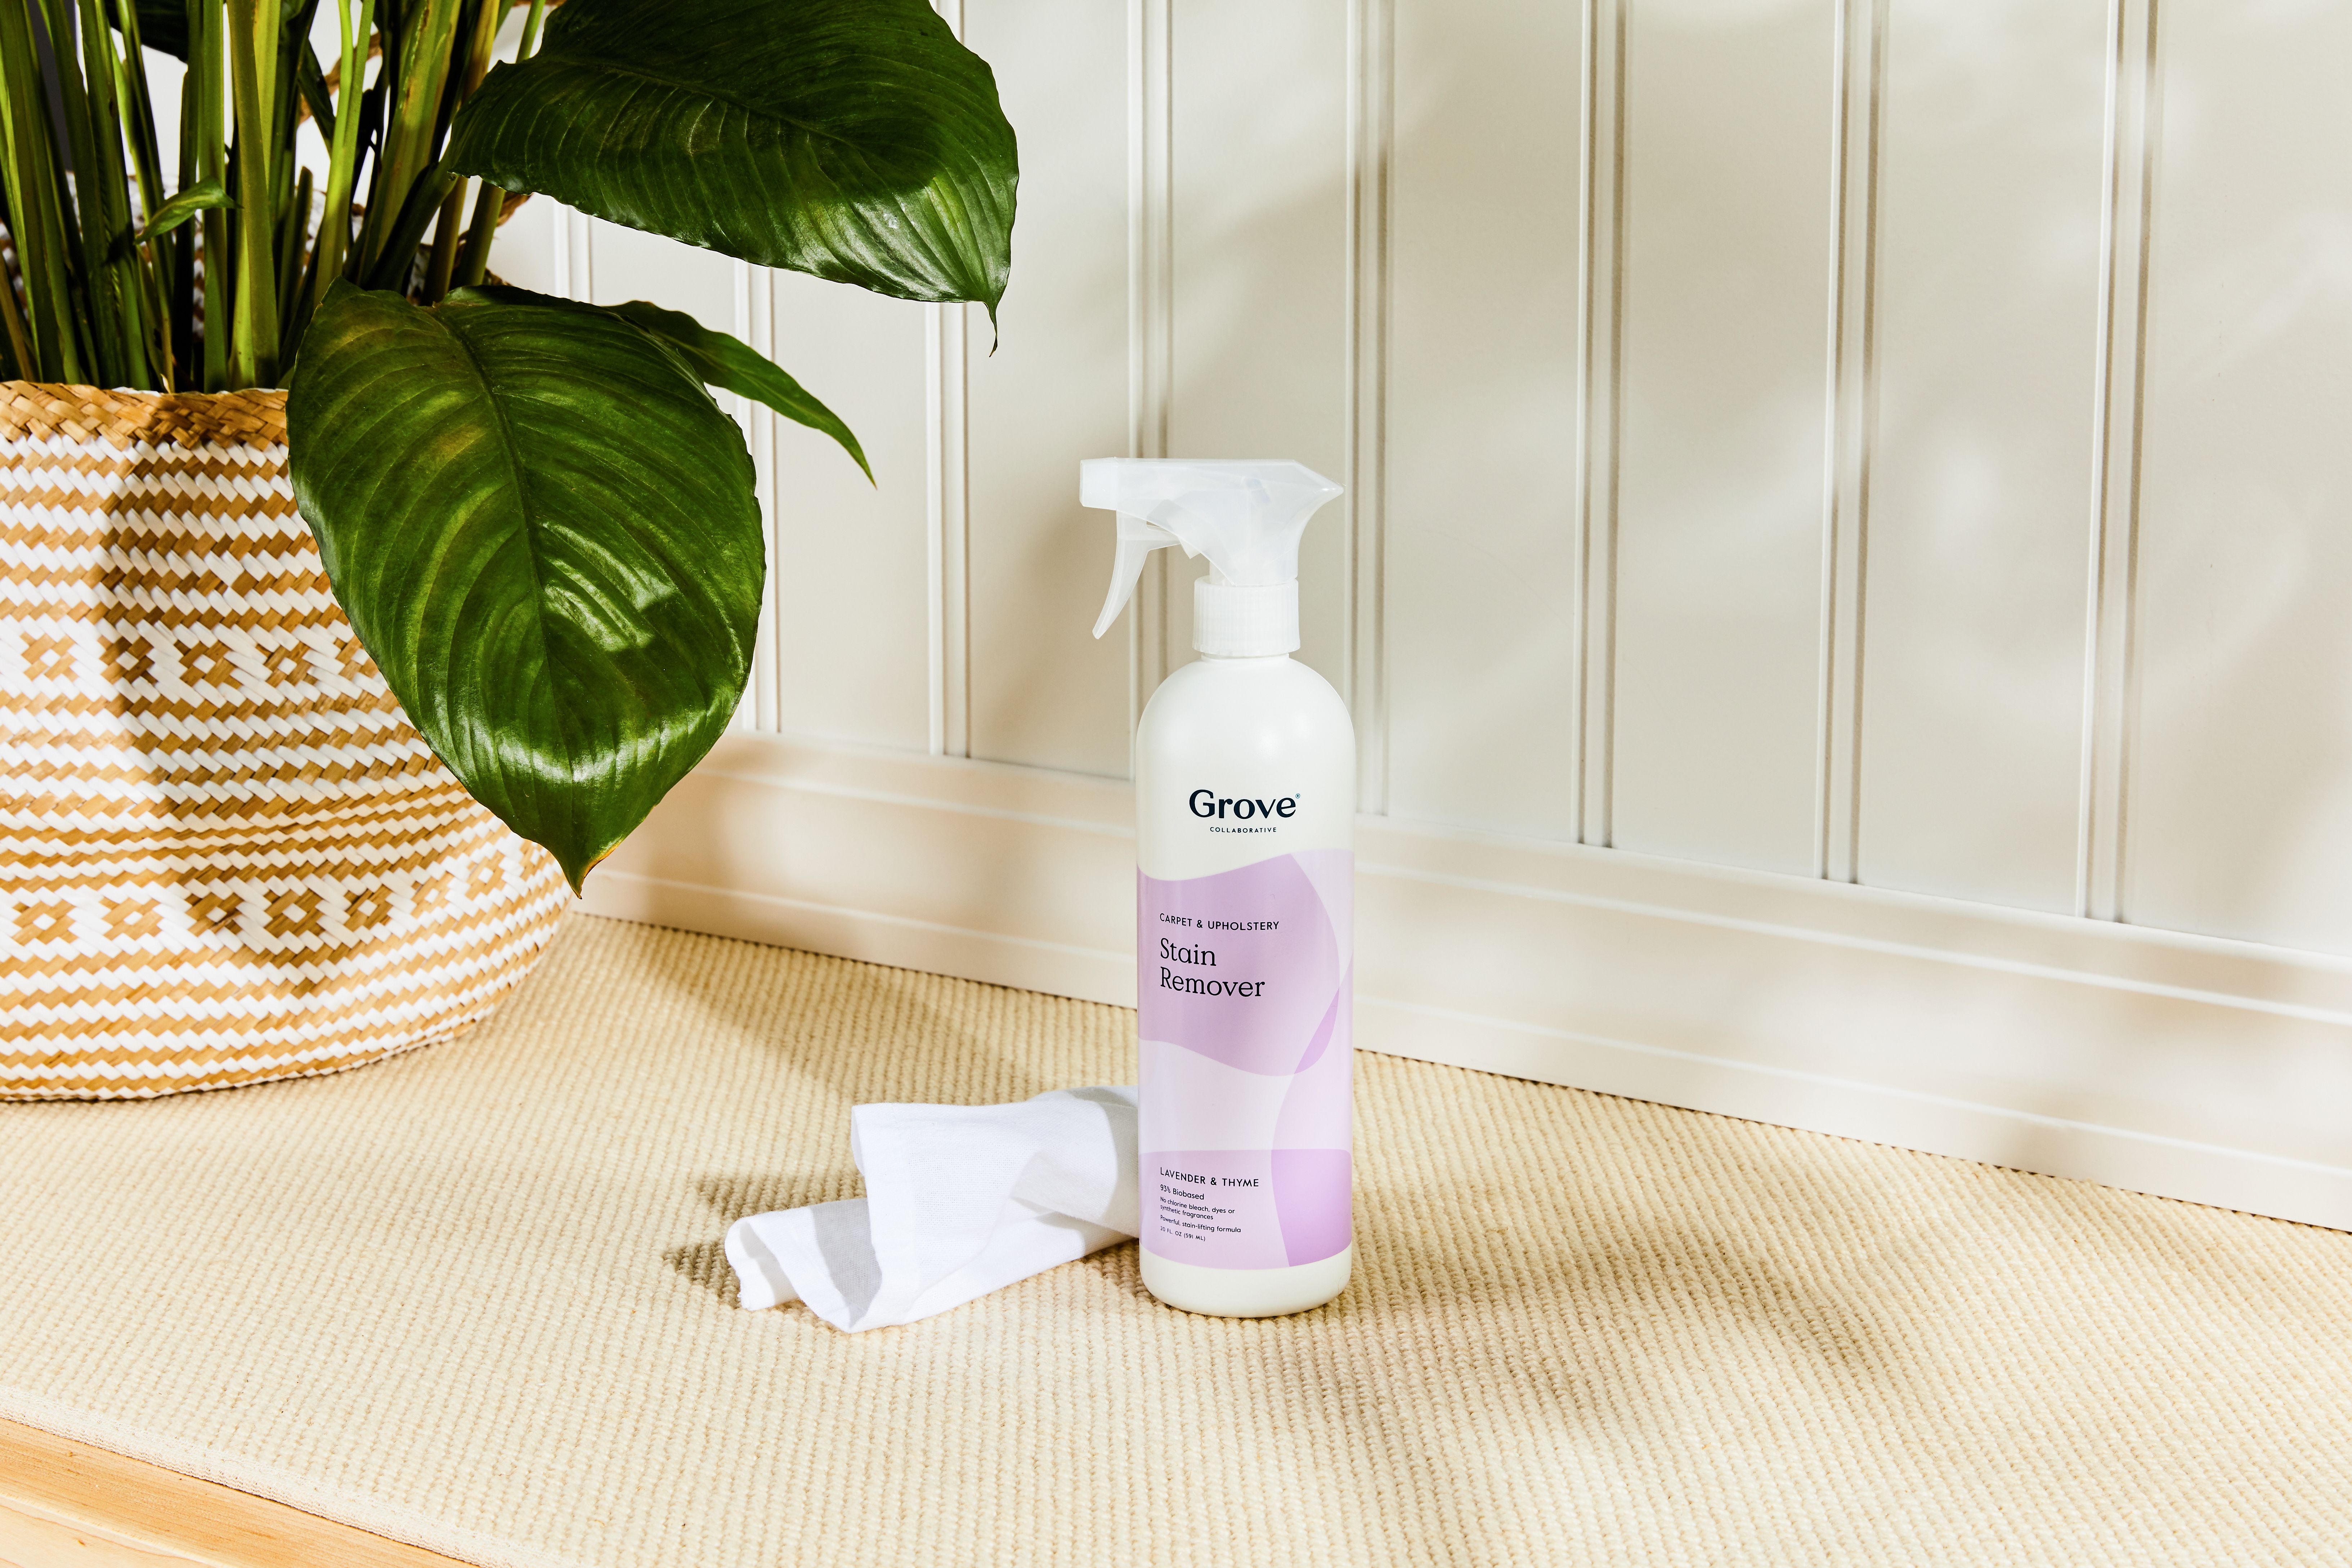 image of Grove stain remover next to cloth on stained carpet